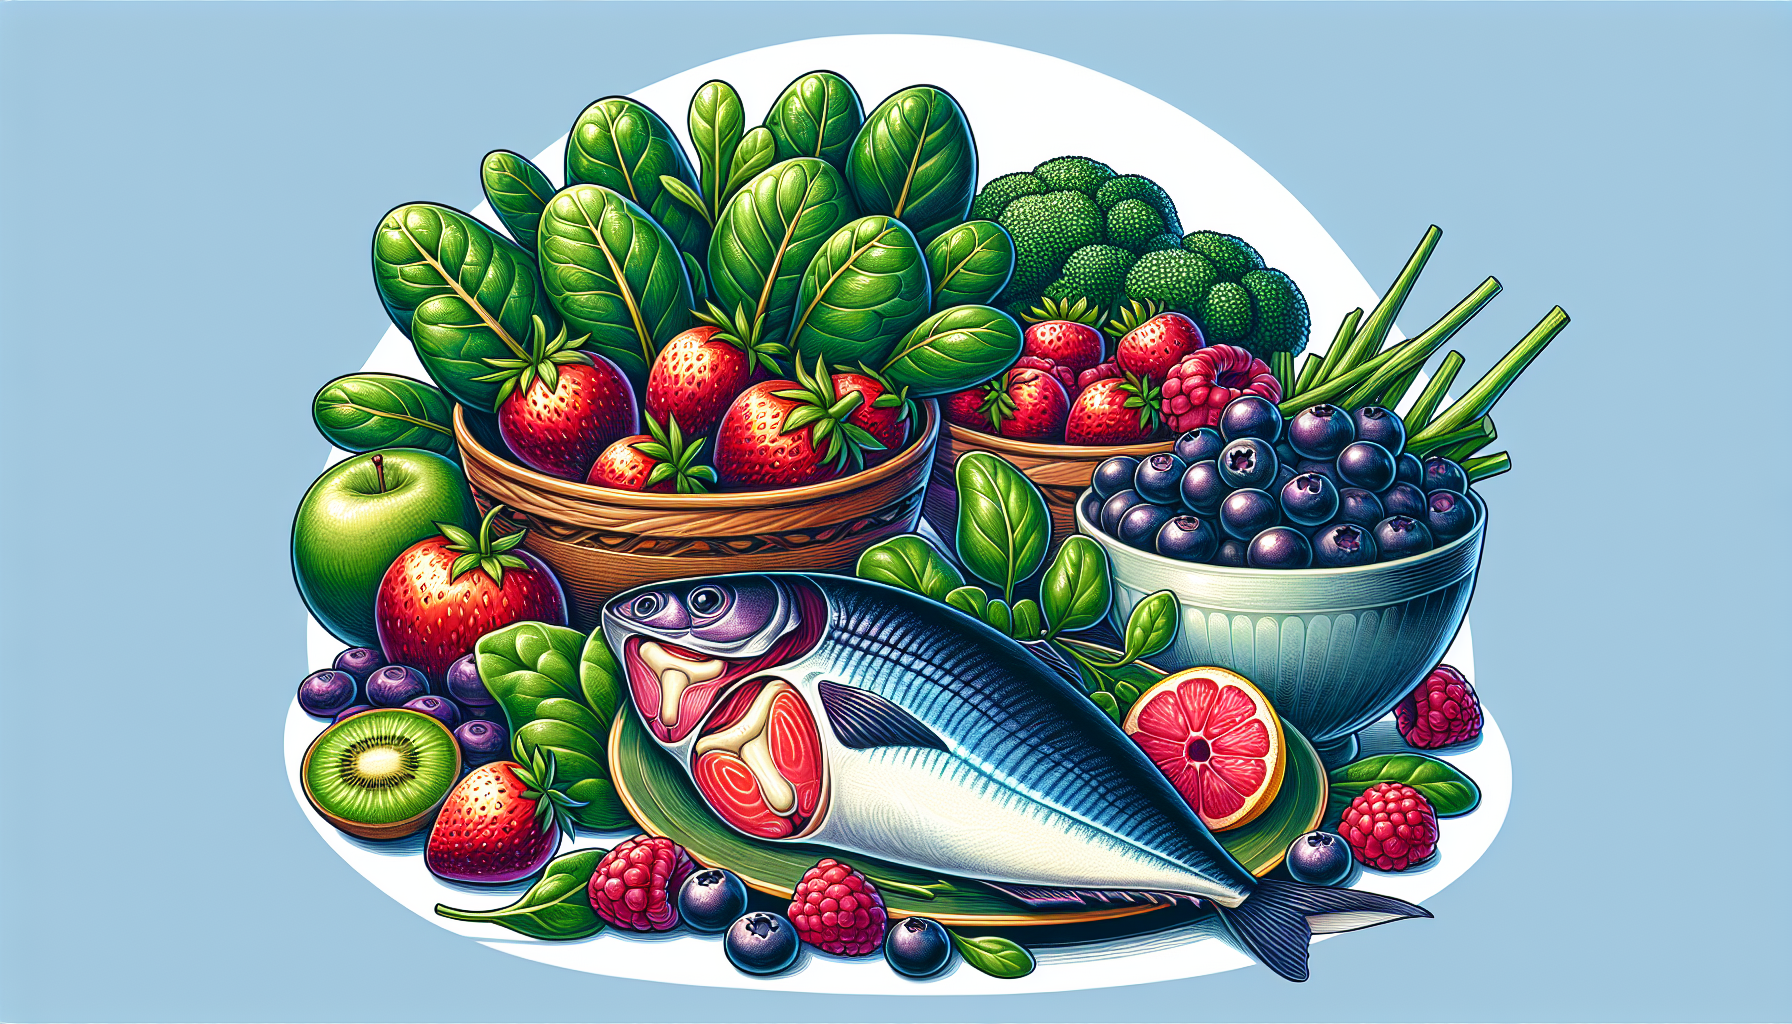 Illustration of anti-inflammatory foods for knee cartilage health